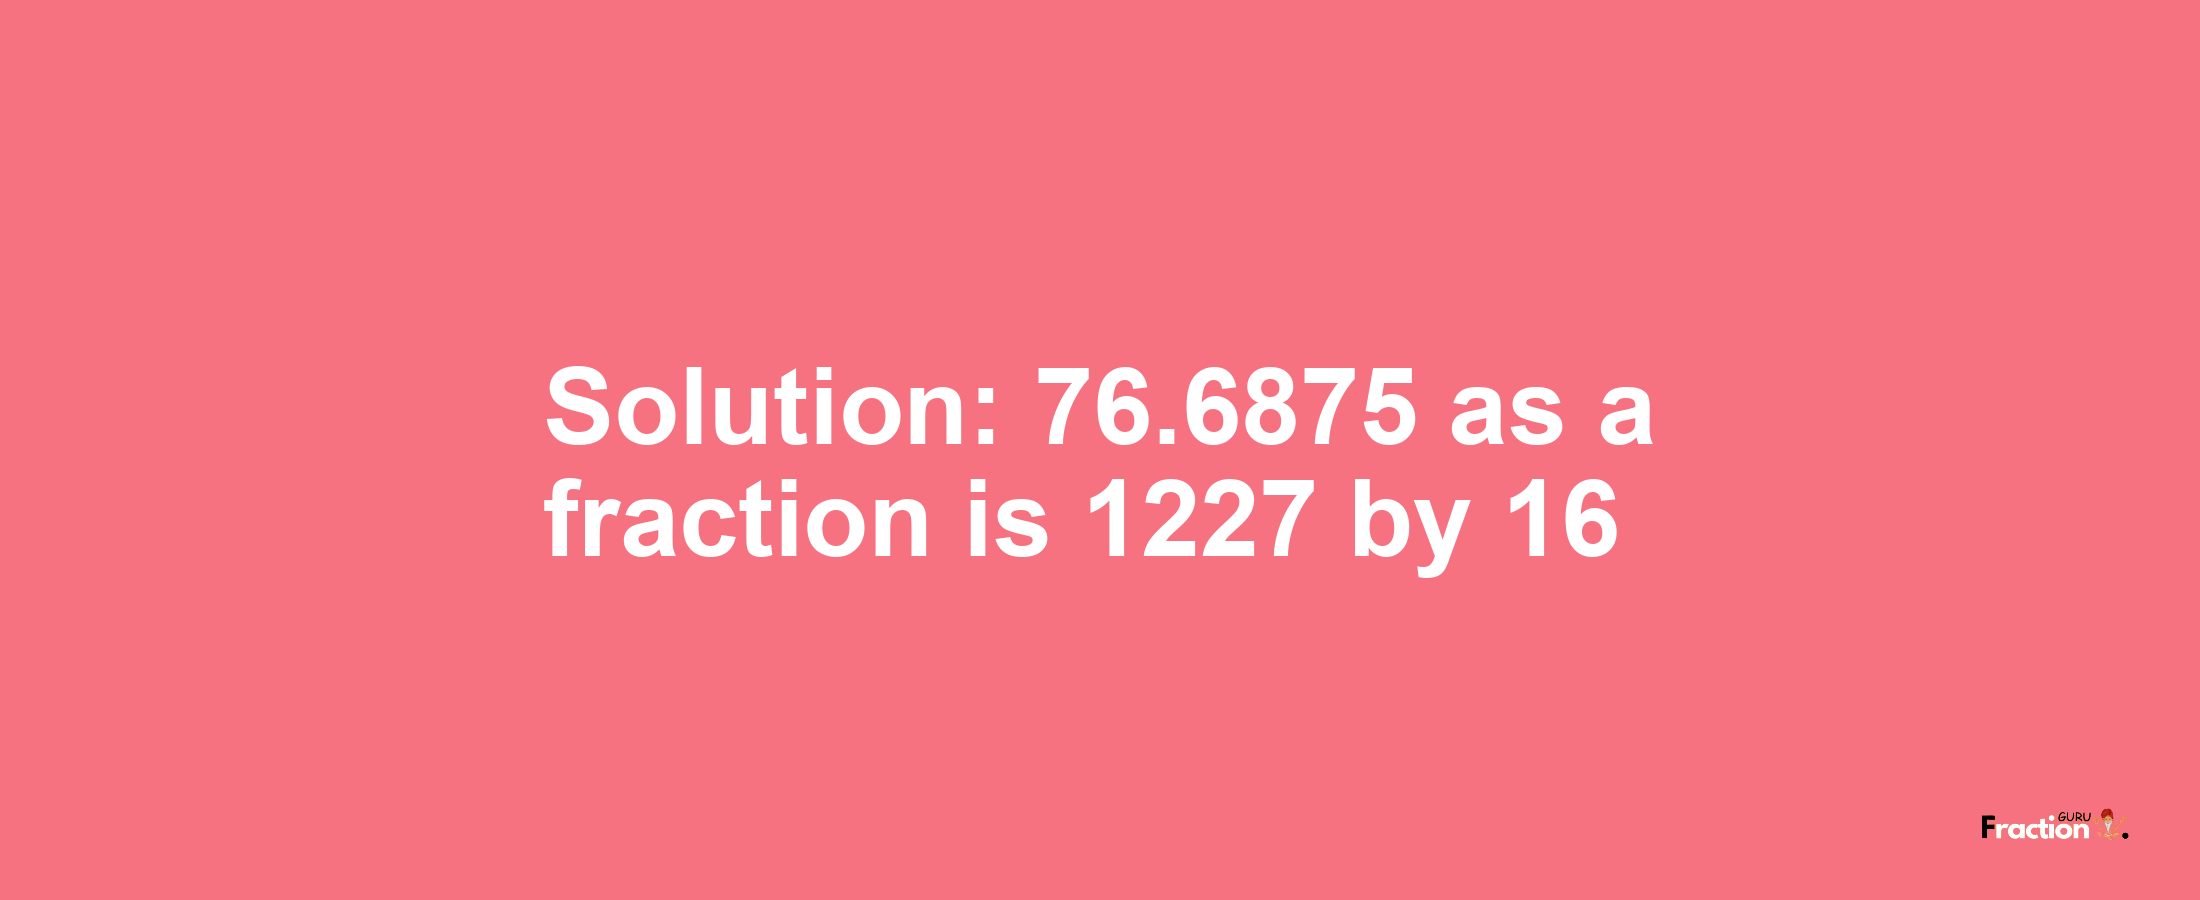 Solution:76.6875 as a fraction is 1227/16